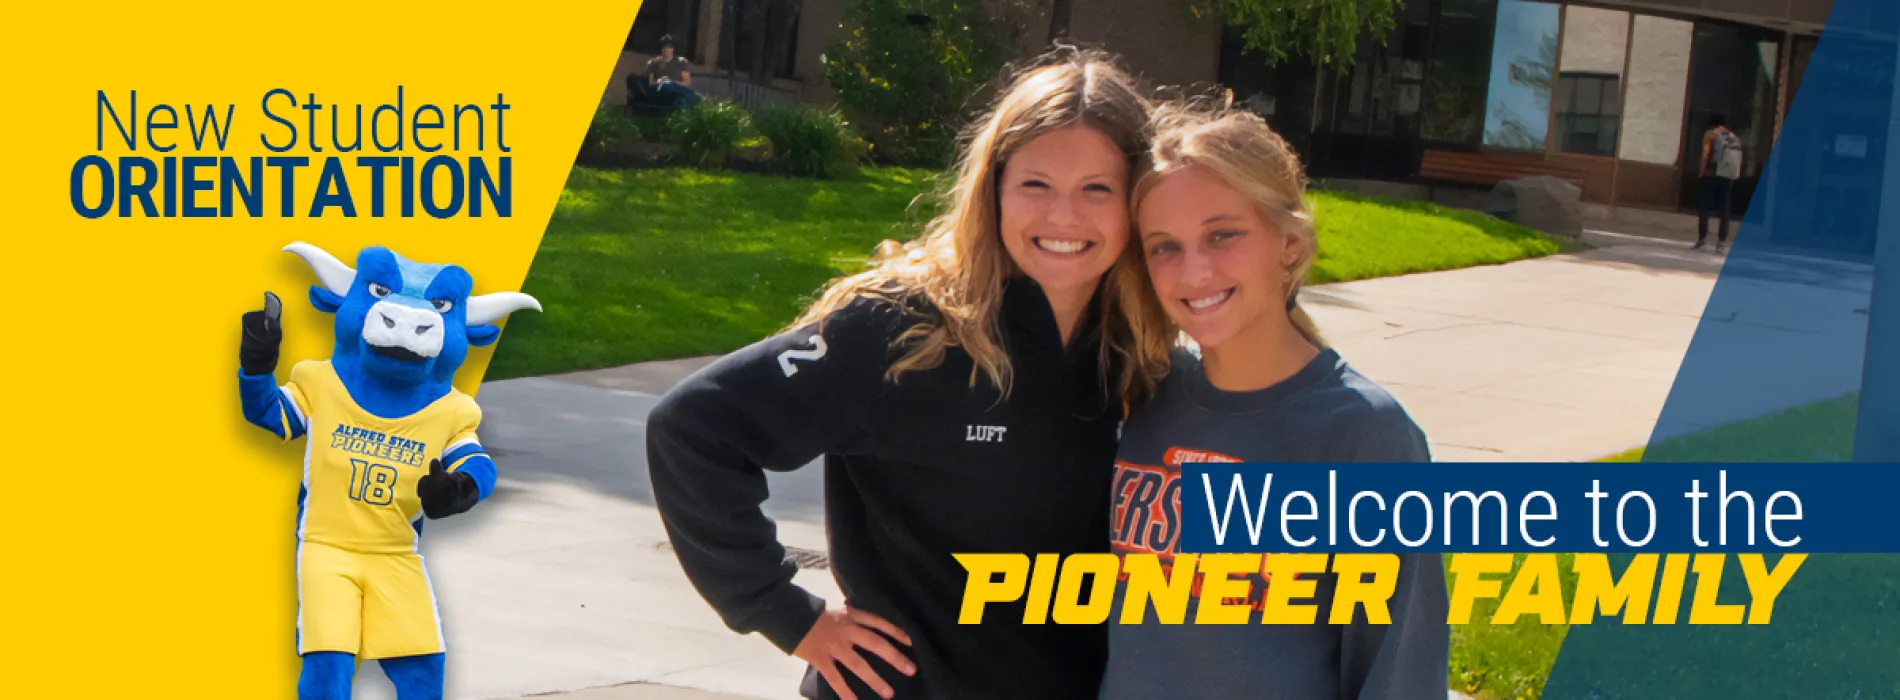 Welcome to the Pioneer Family! Image of ox mascot and students on campus sidewalk.